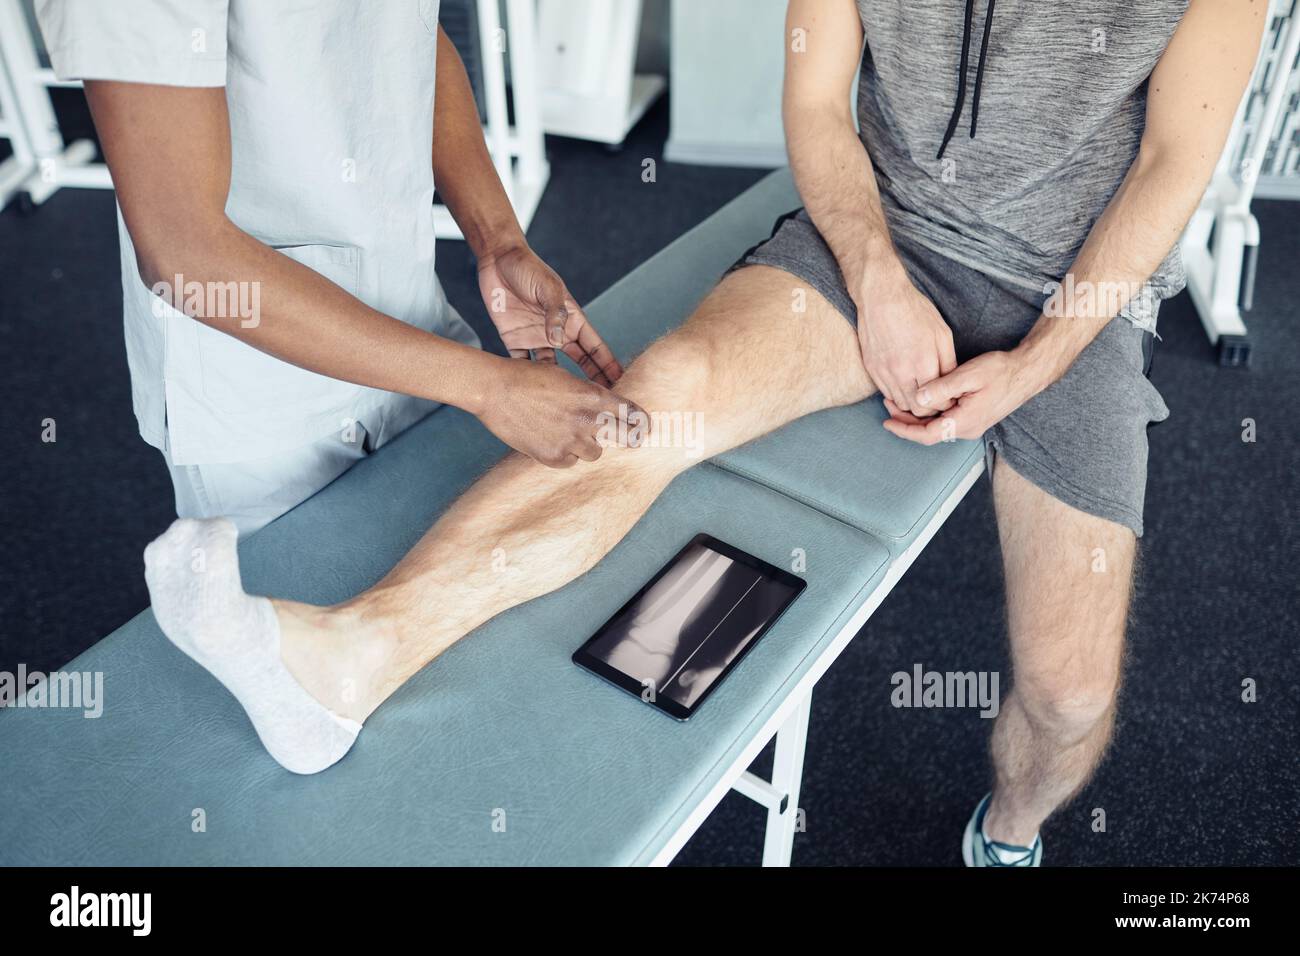 High angle view of massage therapist making massage to patient on couch Stock Photo